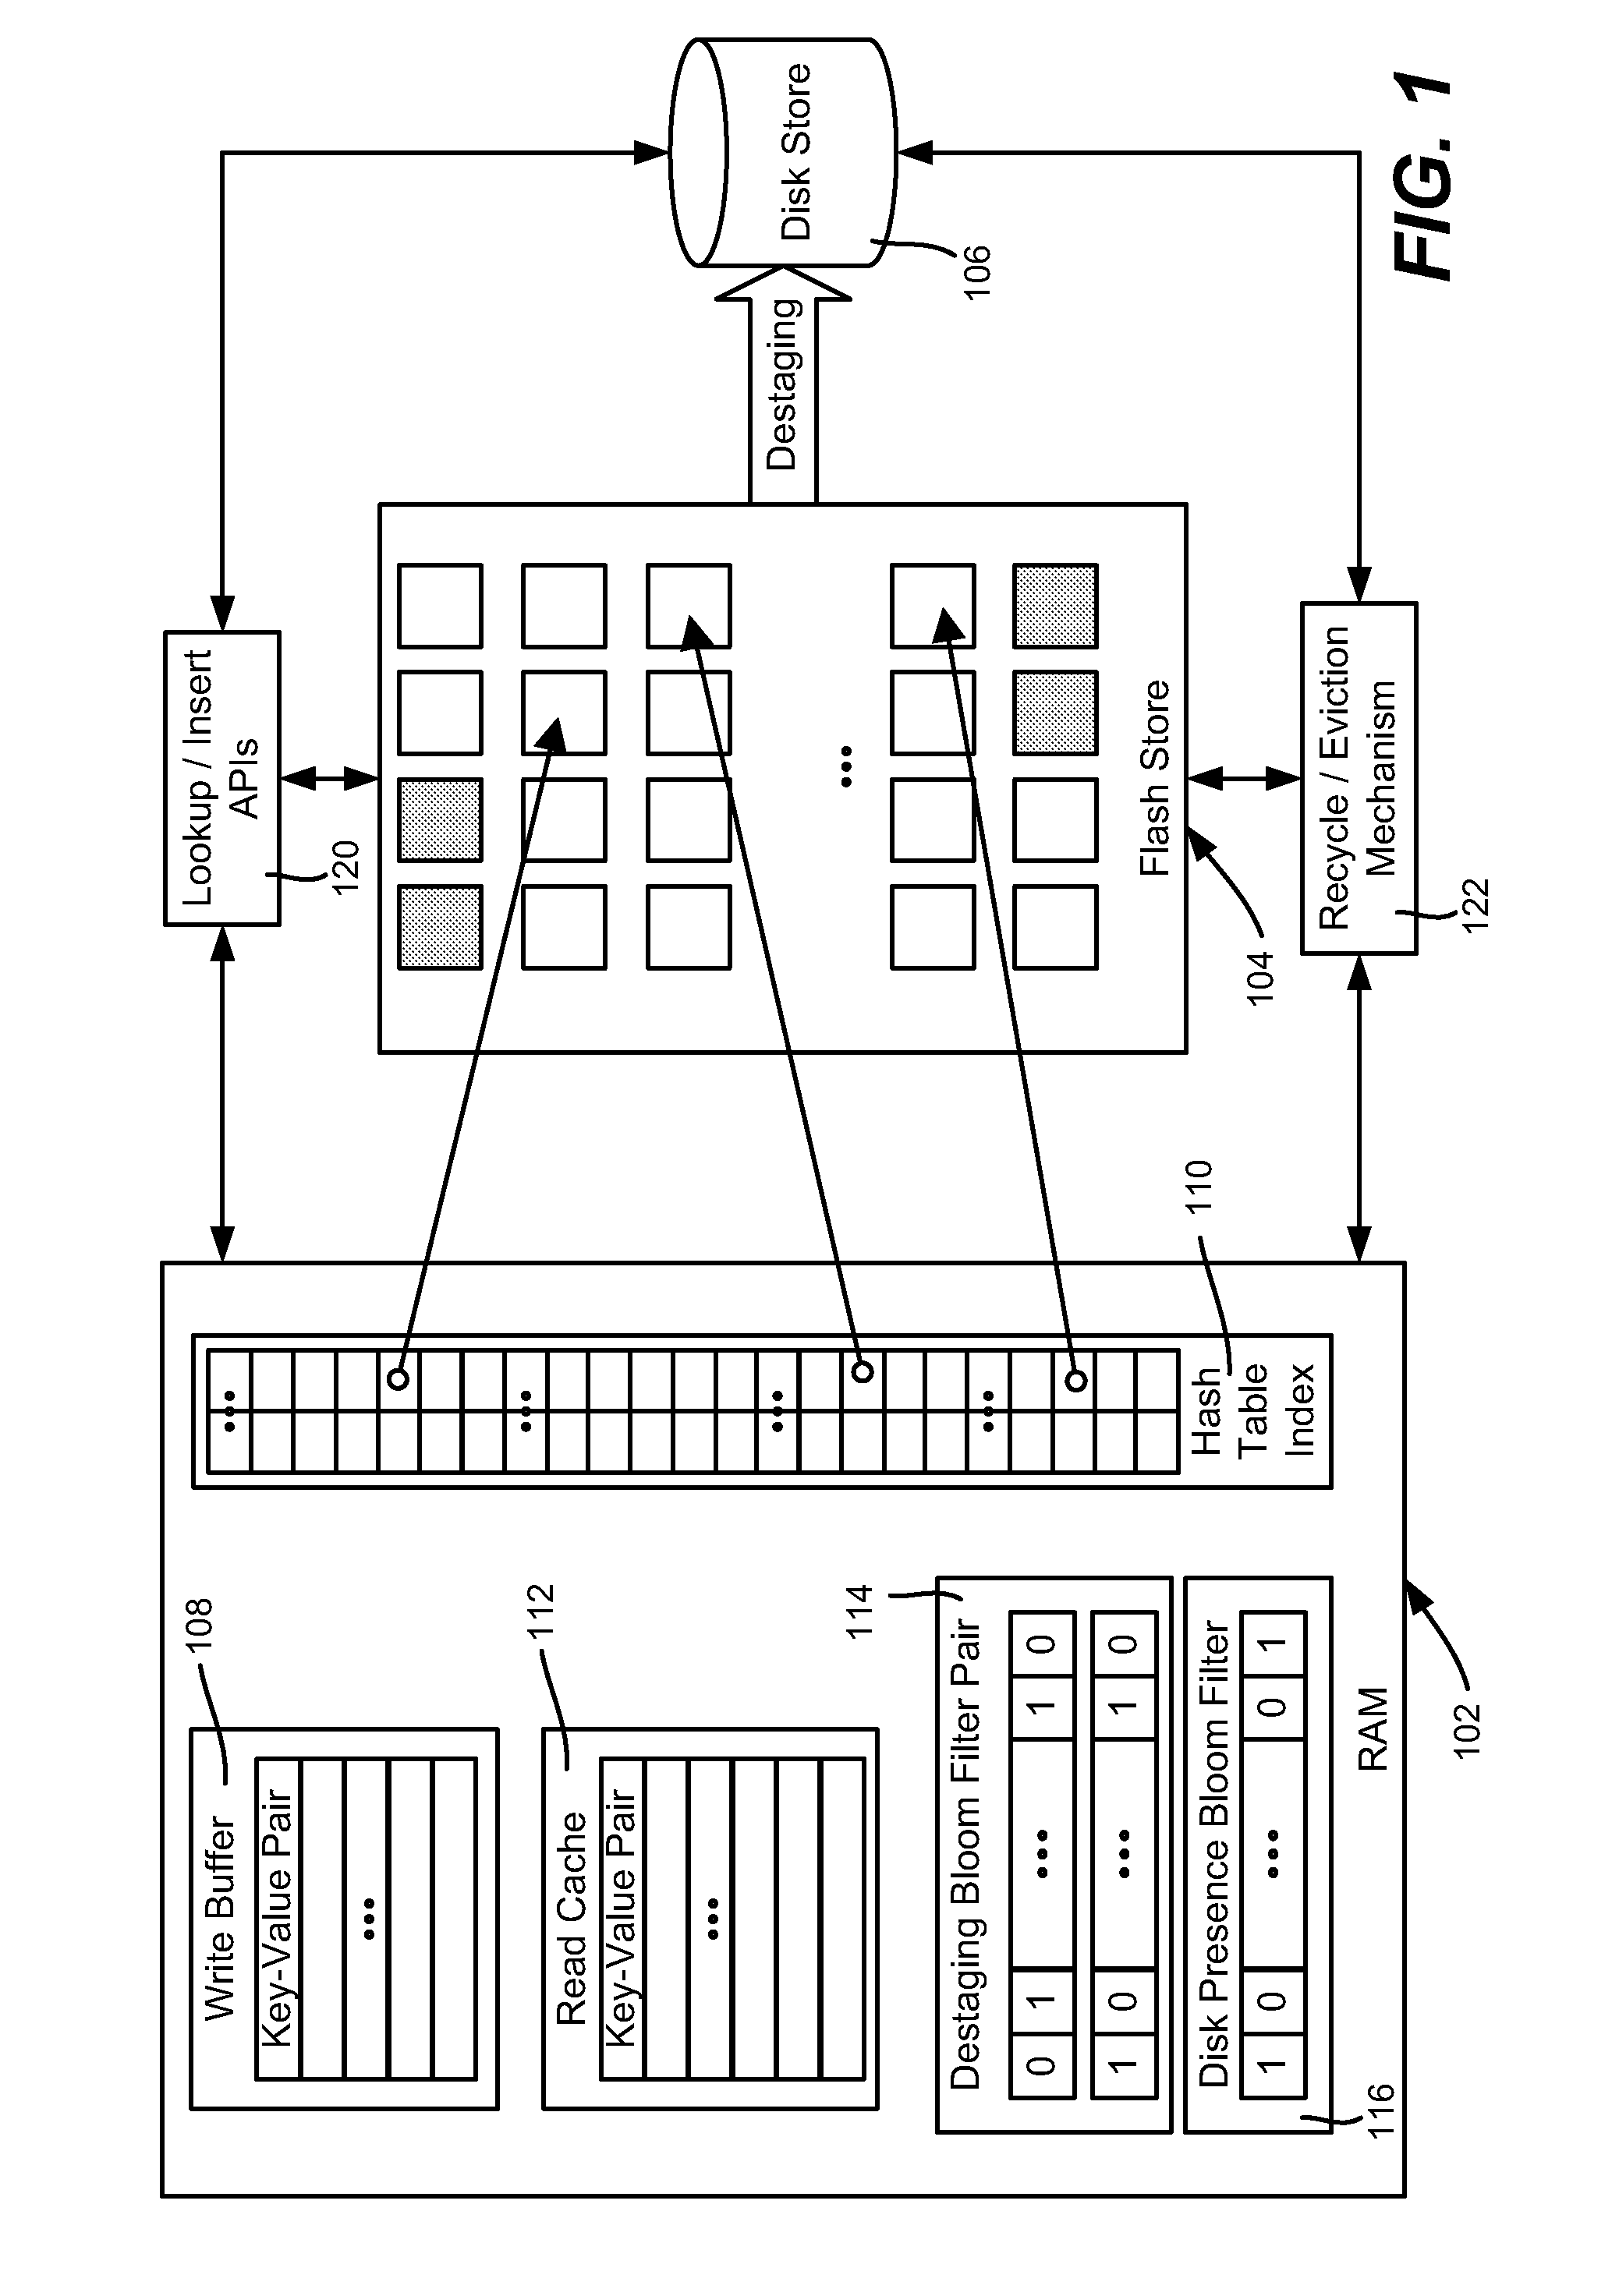 Flash memory cache including for use with persistent key-value store